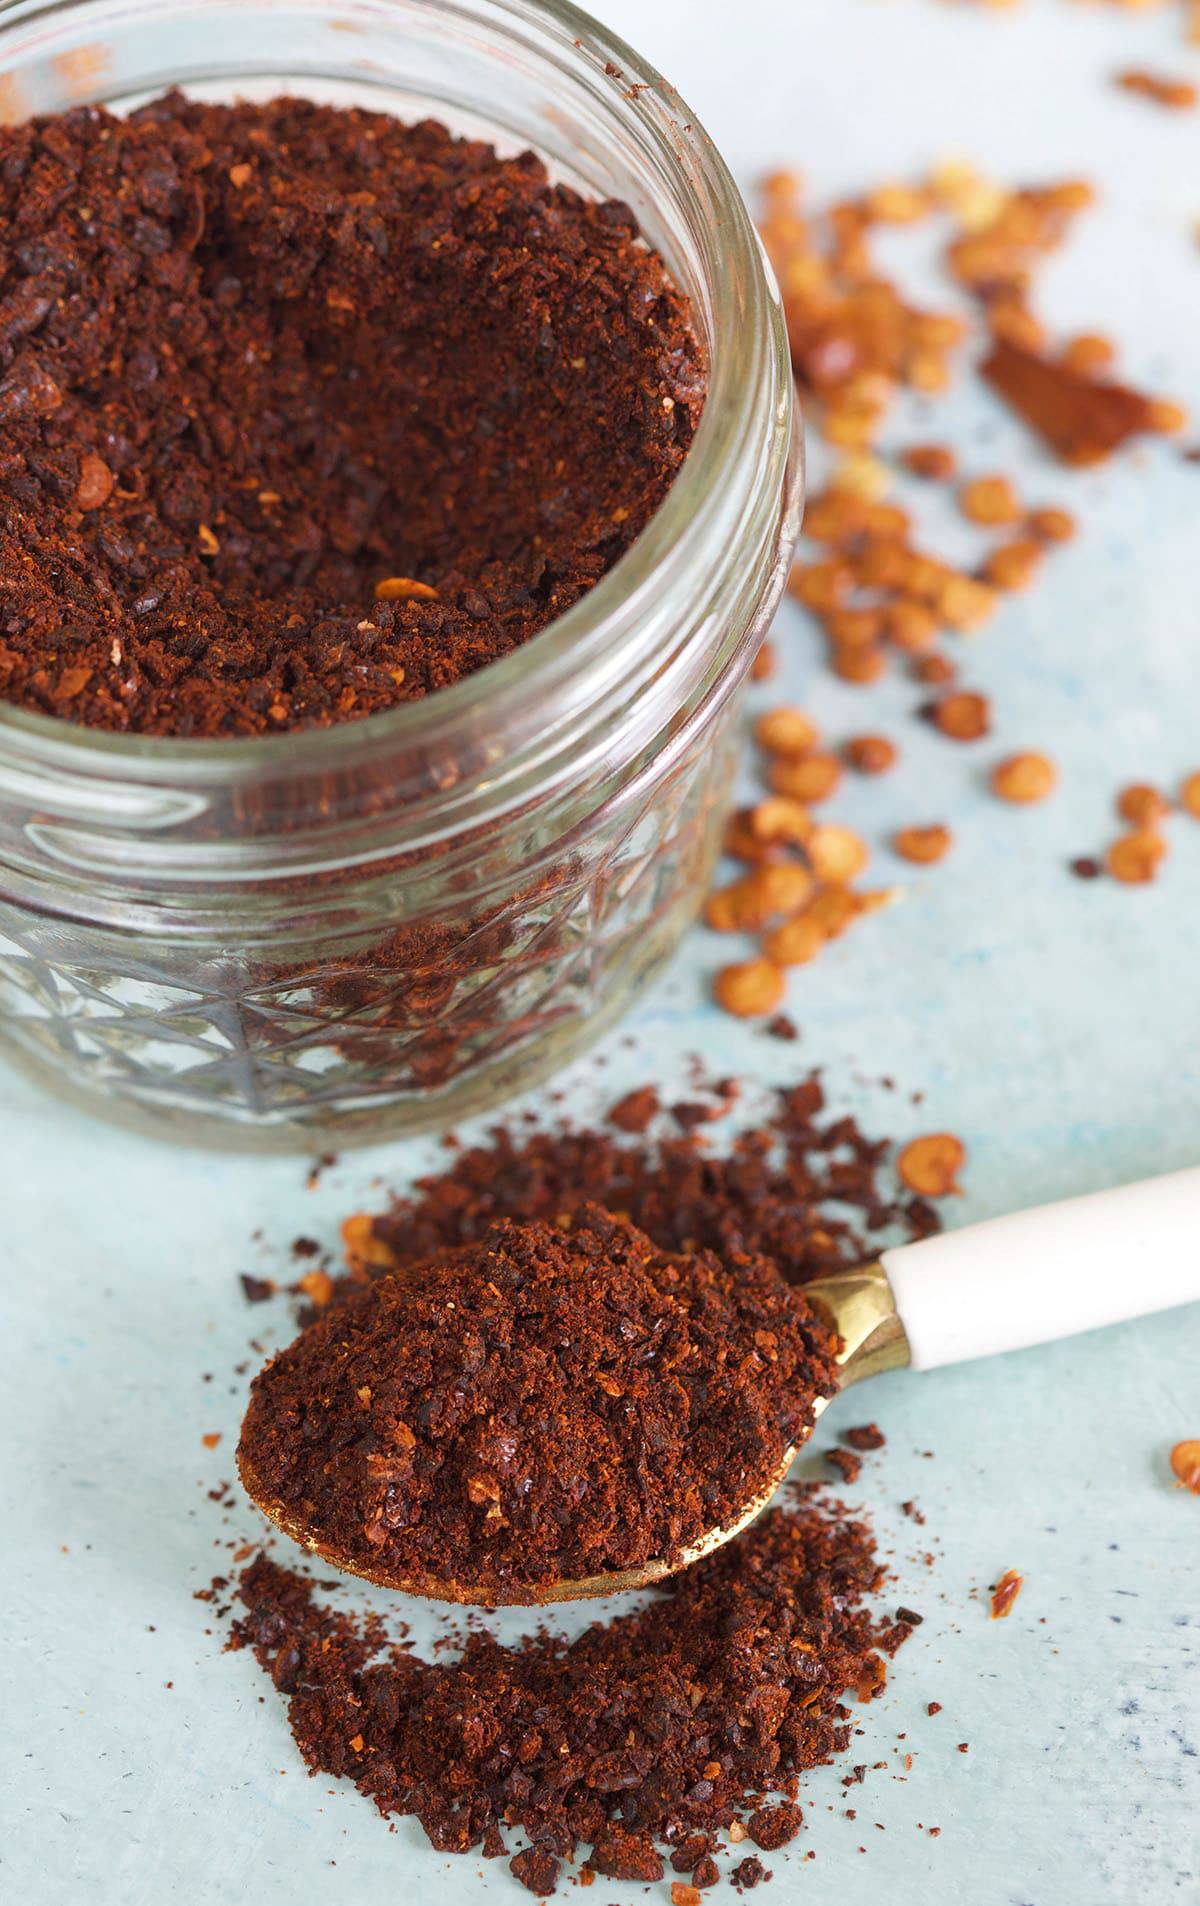 A spoon full of chili powder is placed next to a full jar.